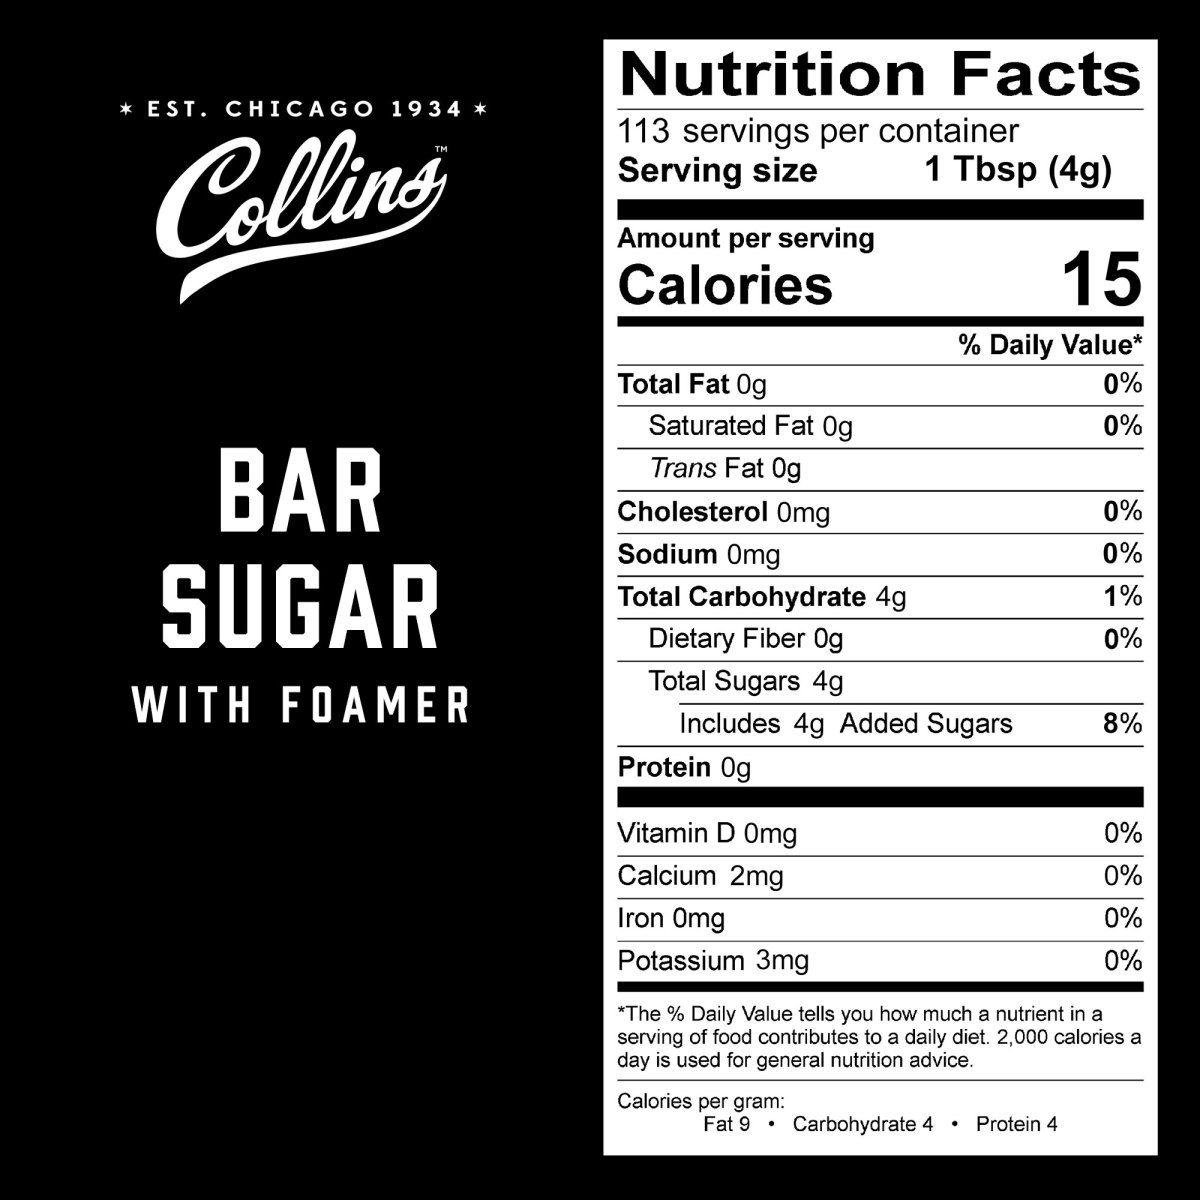 Collins Bar Sugar with Foamer  Create Foam Cocktails and Enhance